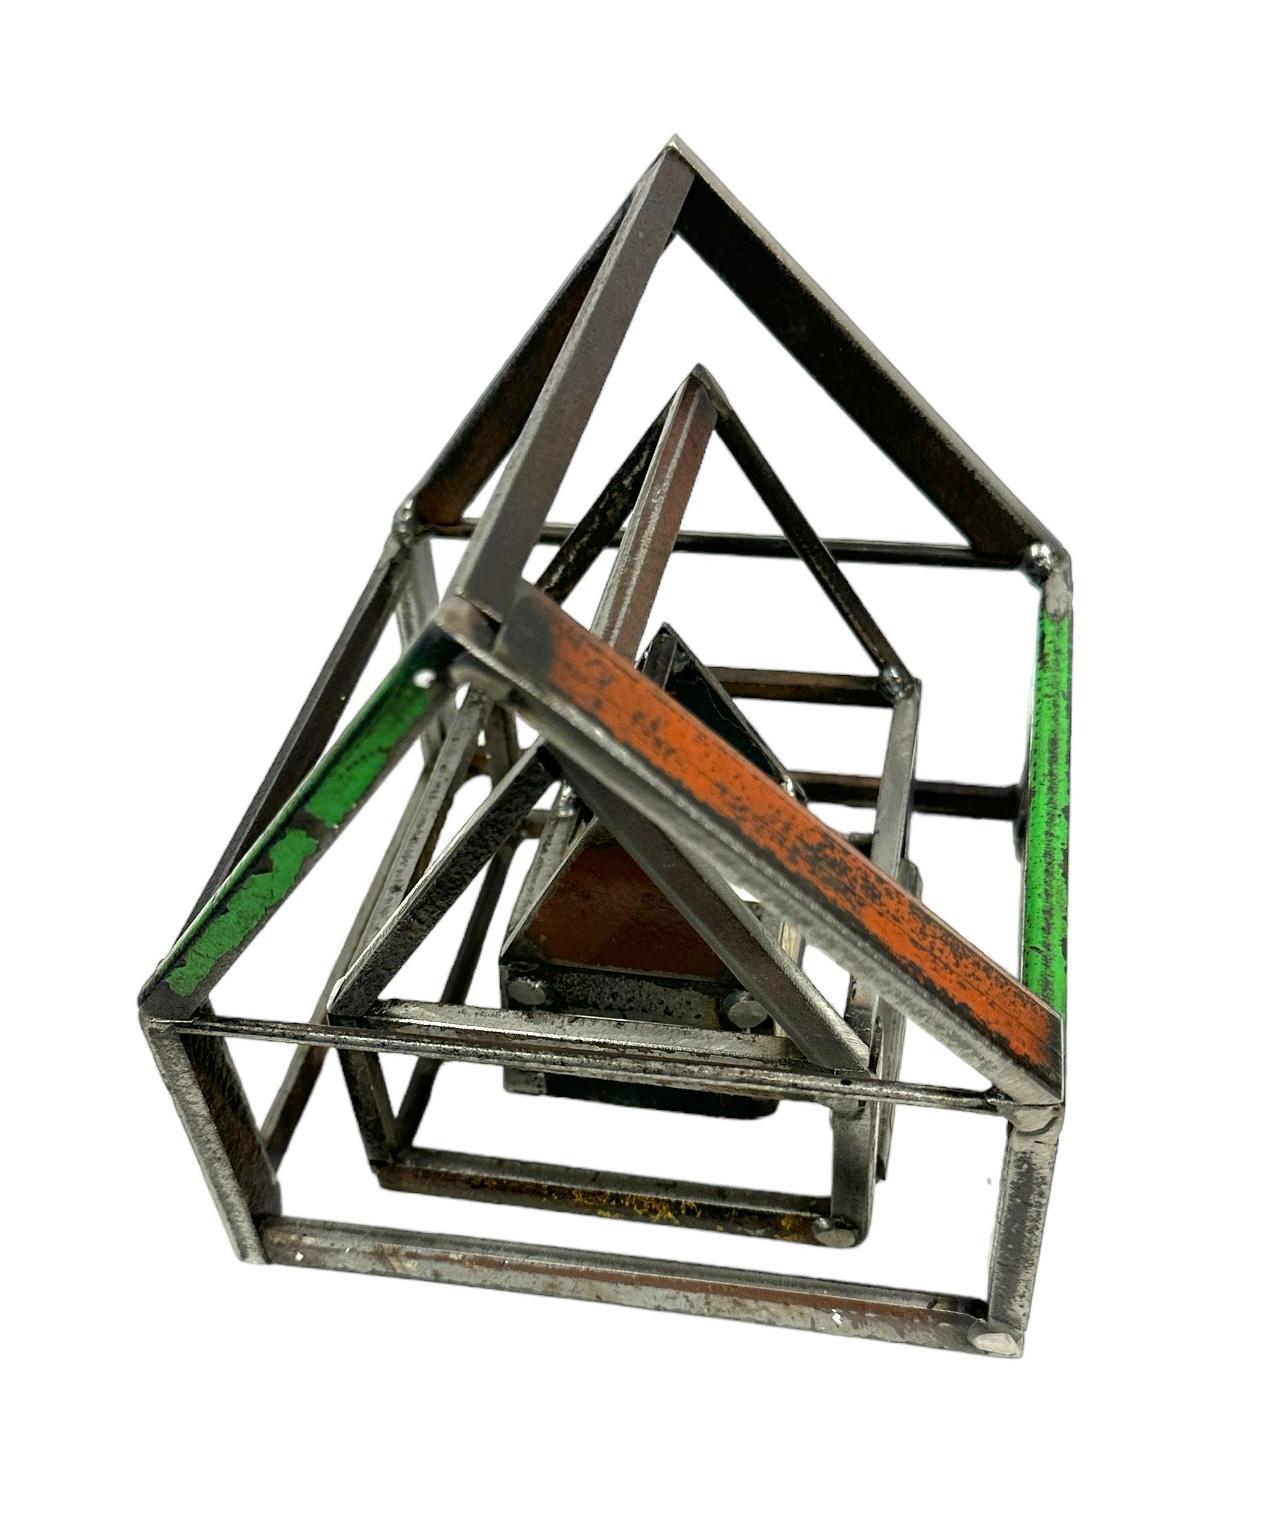 Contemporary Stacking House Structure, Welded Steel Decorative Object Made w/ Salvaged Steel